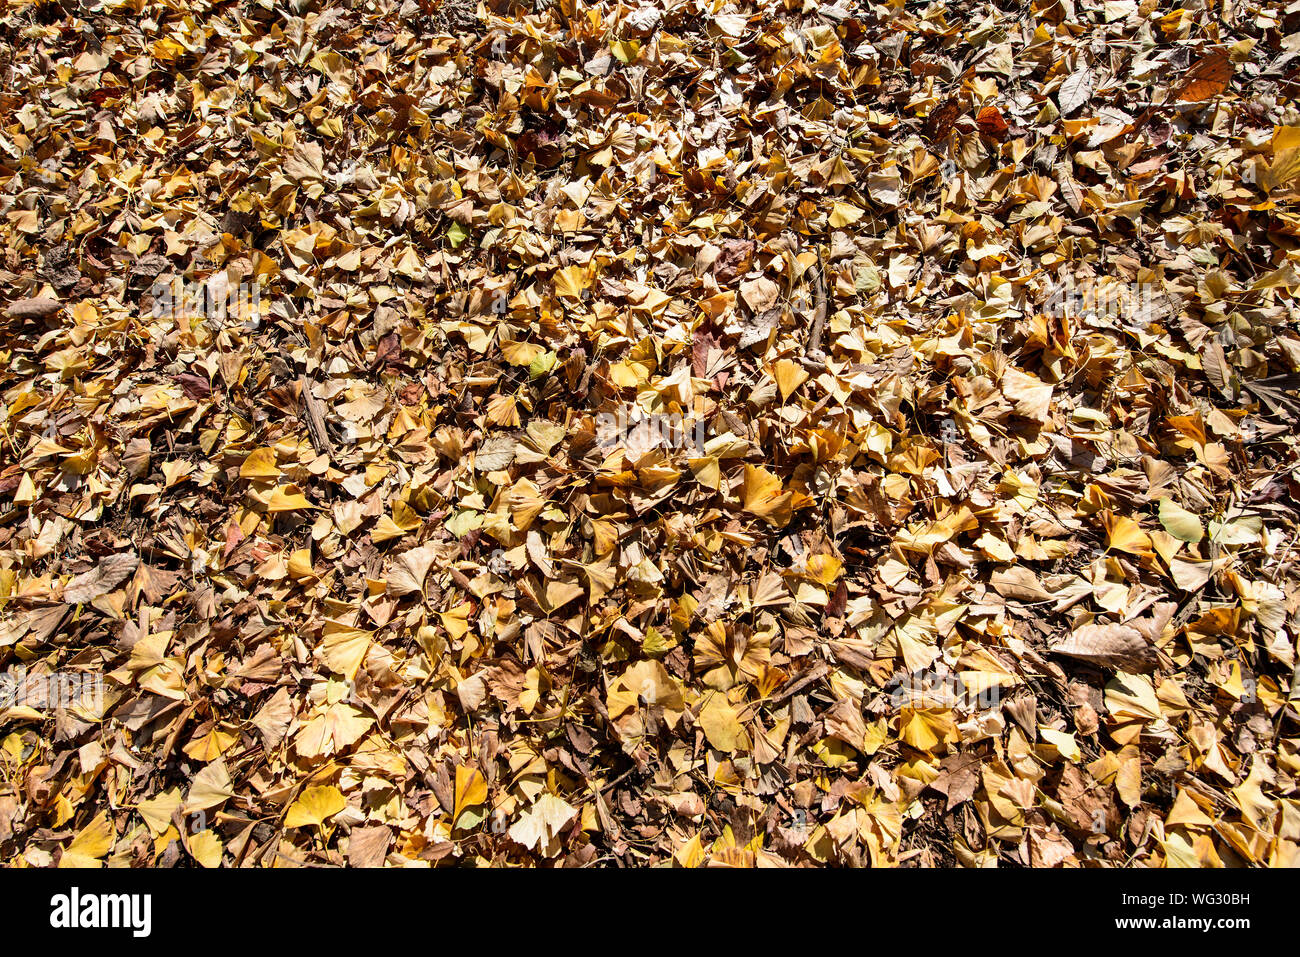 Full Frame Shot Of Fallen Leaves Covering Field During Autumn At Park Stock Photo